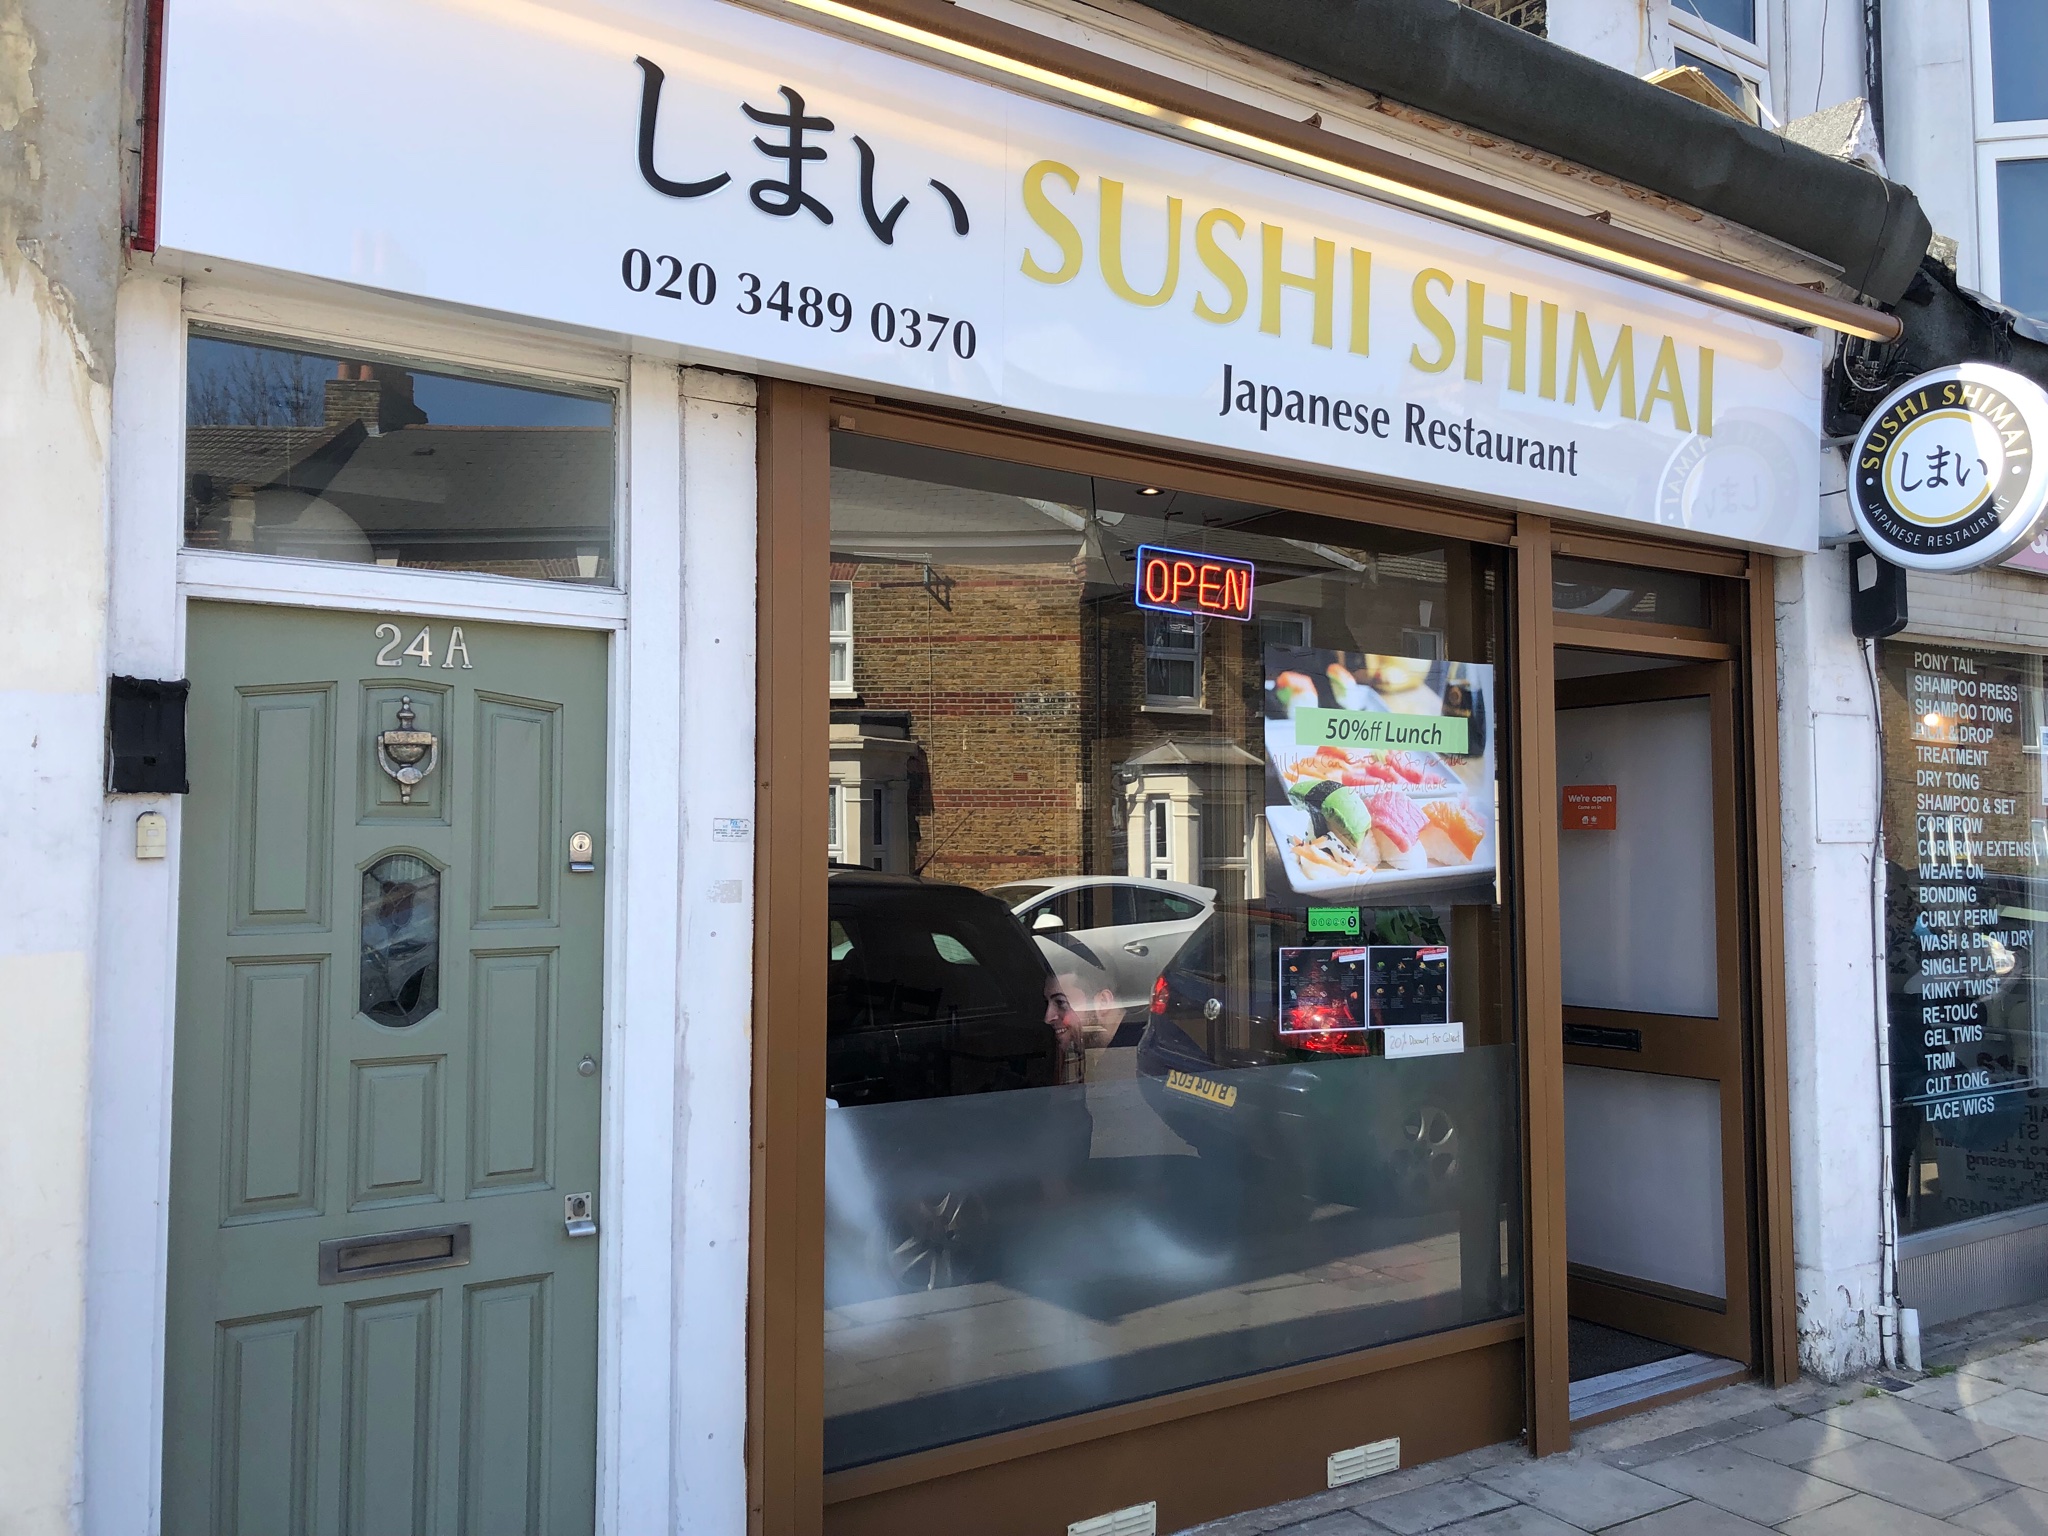 Deepak Sardiwal on Twitter: "Pleased to see 'Sushi Shimai' on Milkwood Road the latest addition to the restaurant scene in the area already proving popular with locals. Top tip: lunch is half